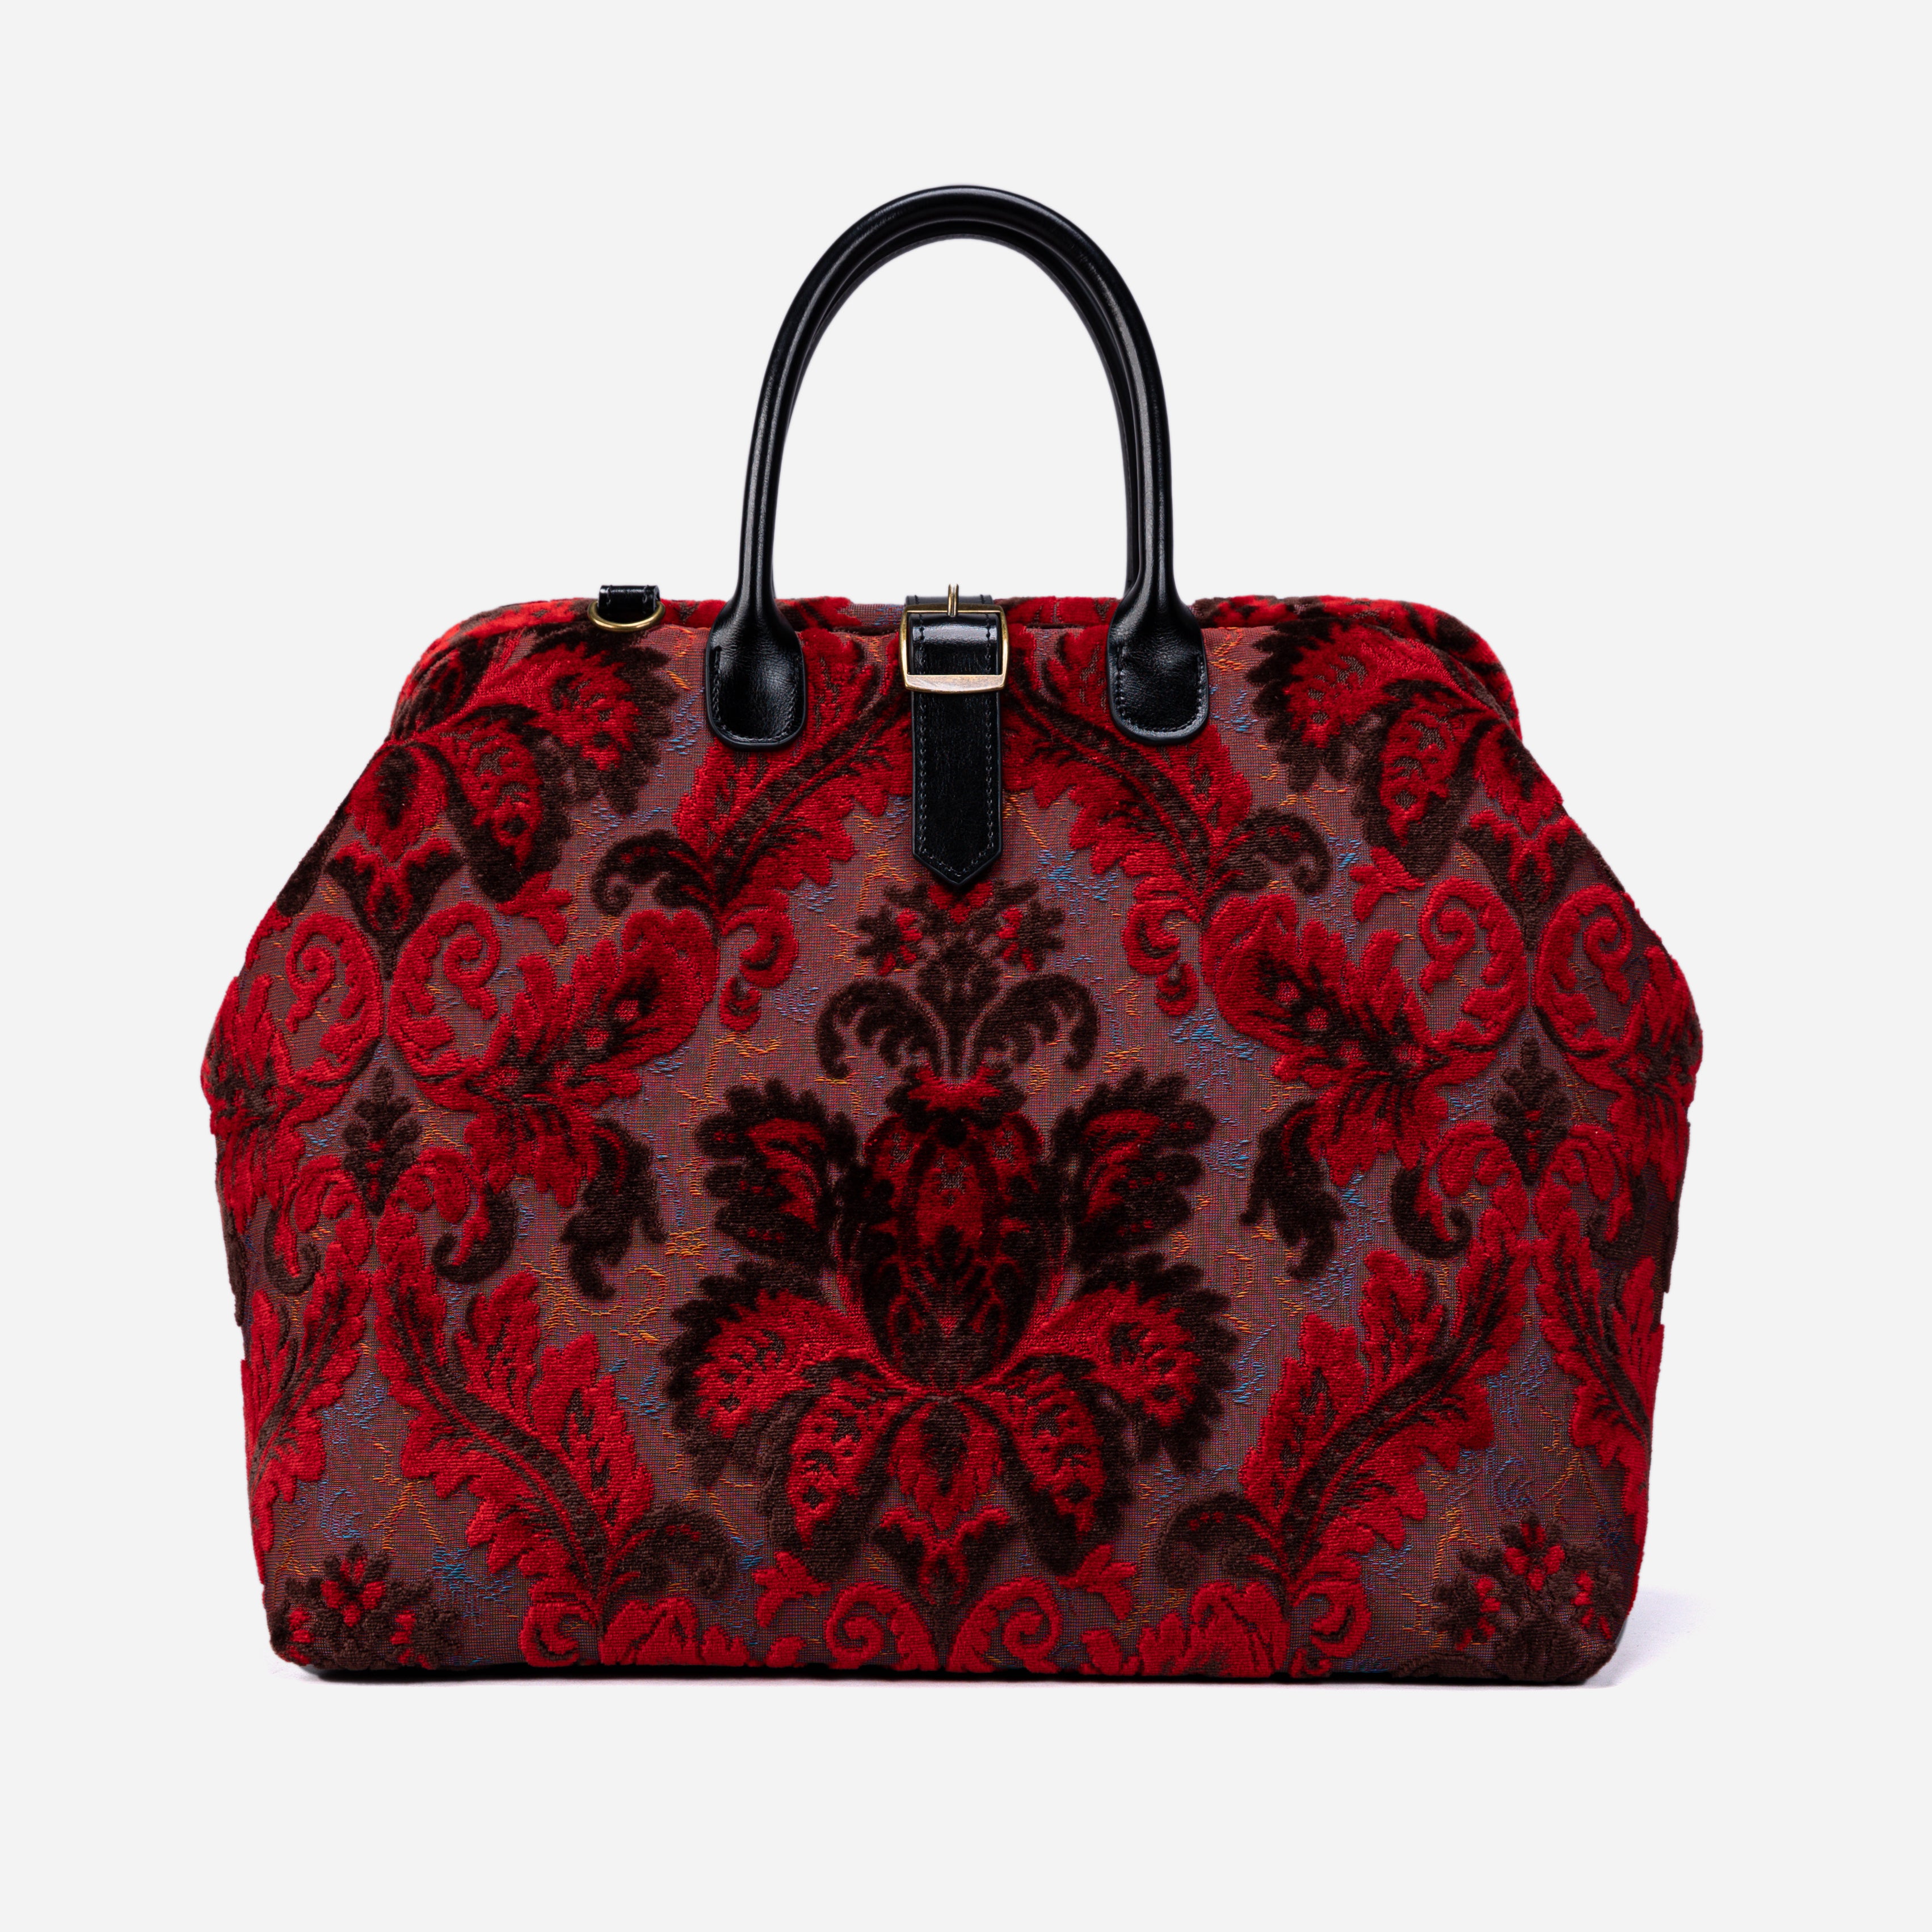 Mary Poppins Carpetbag Revival scarlet weekender front